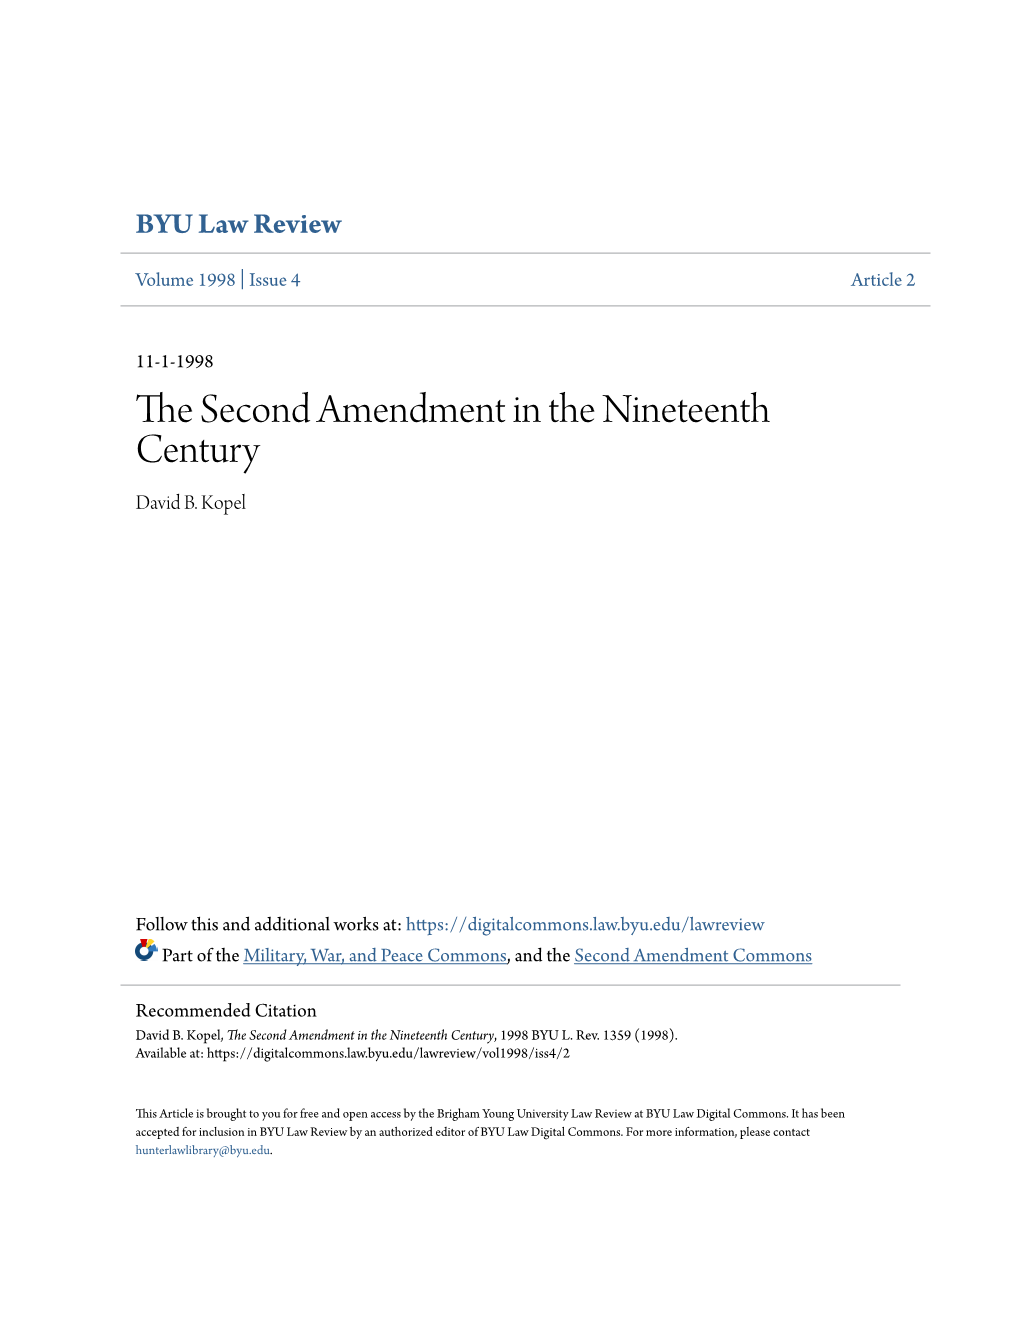 The Second Amendment in the Nineteenth Century, 1998 BYU L